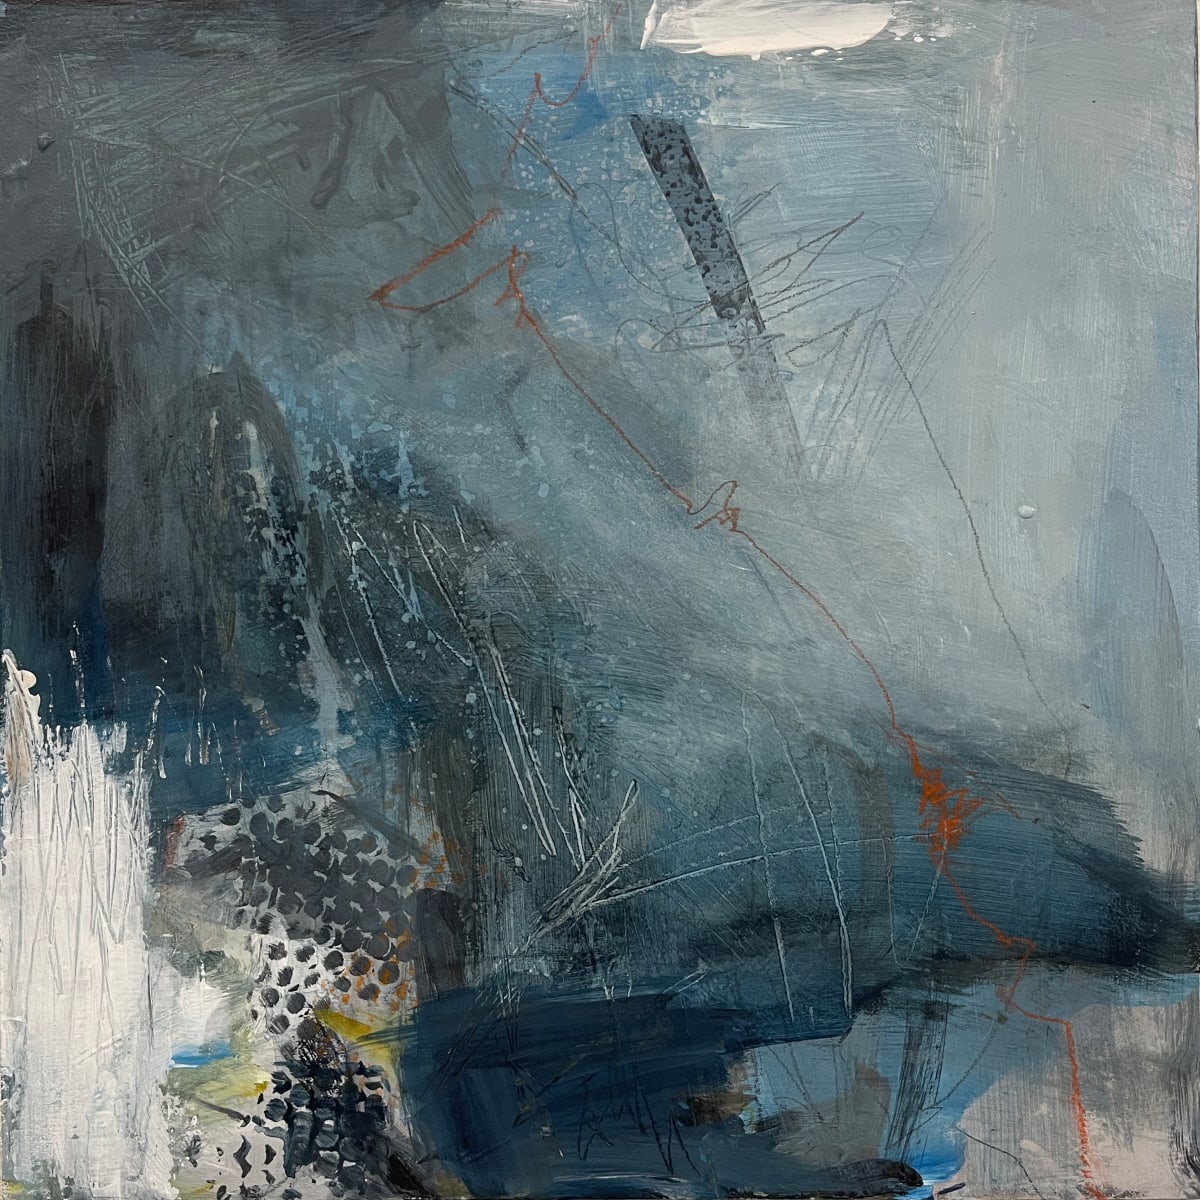 Blue Abstract I by Kelly Dillard  Image: Blue Abstract I | 12" x 12" x 2" | on cradled board